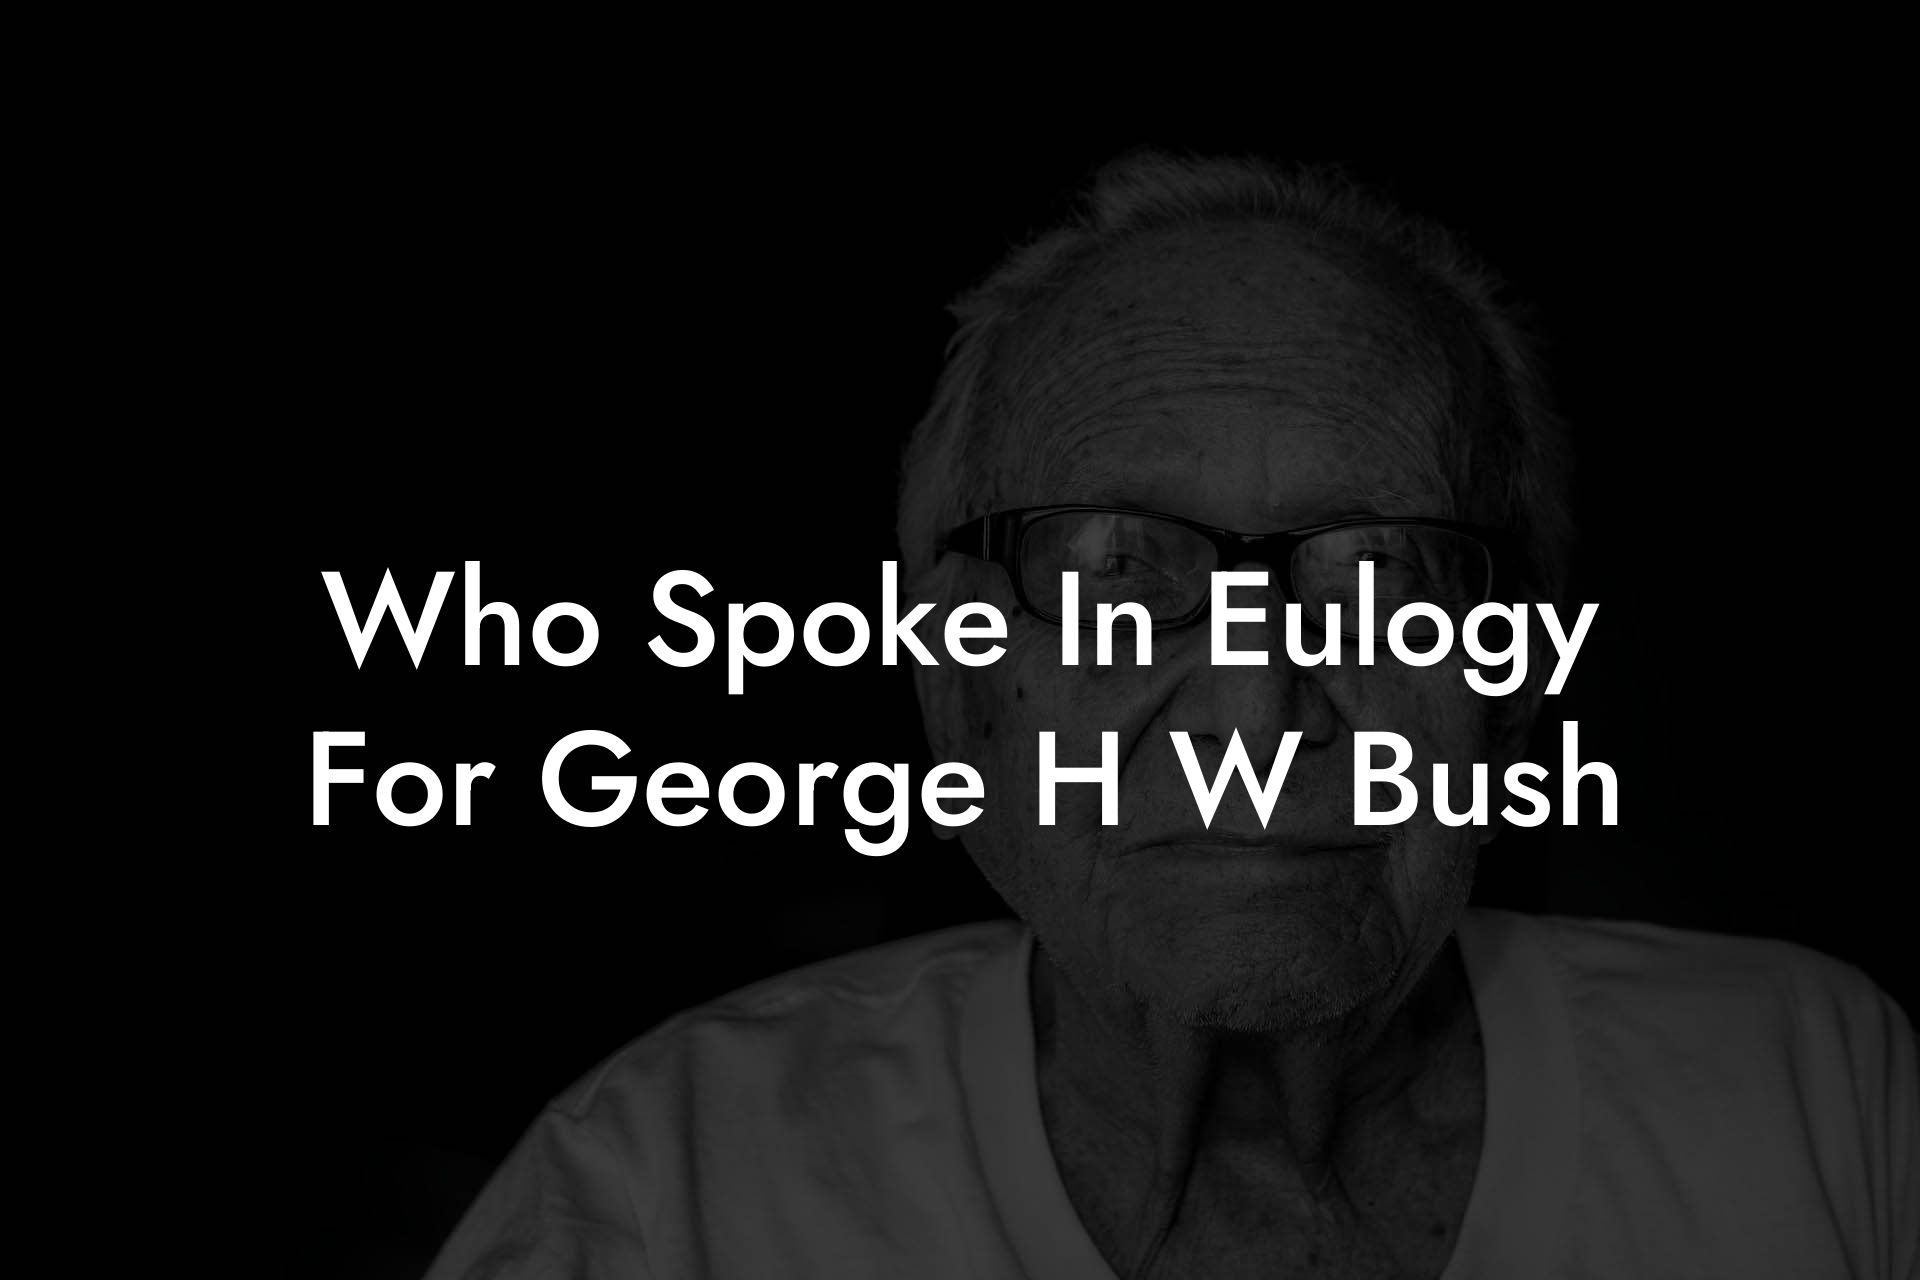 Who Spoke In Eulogy For George H W Bush